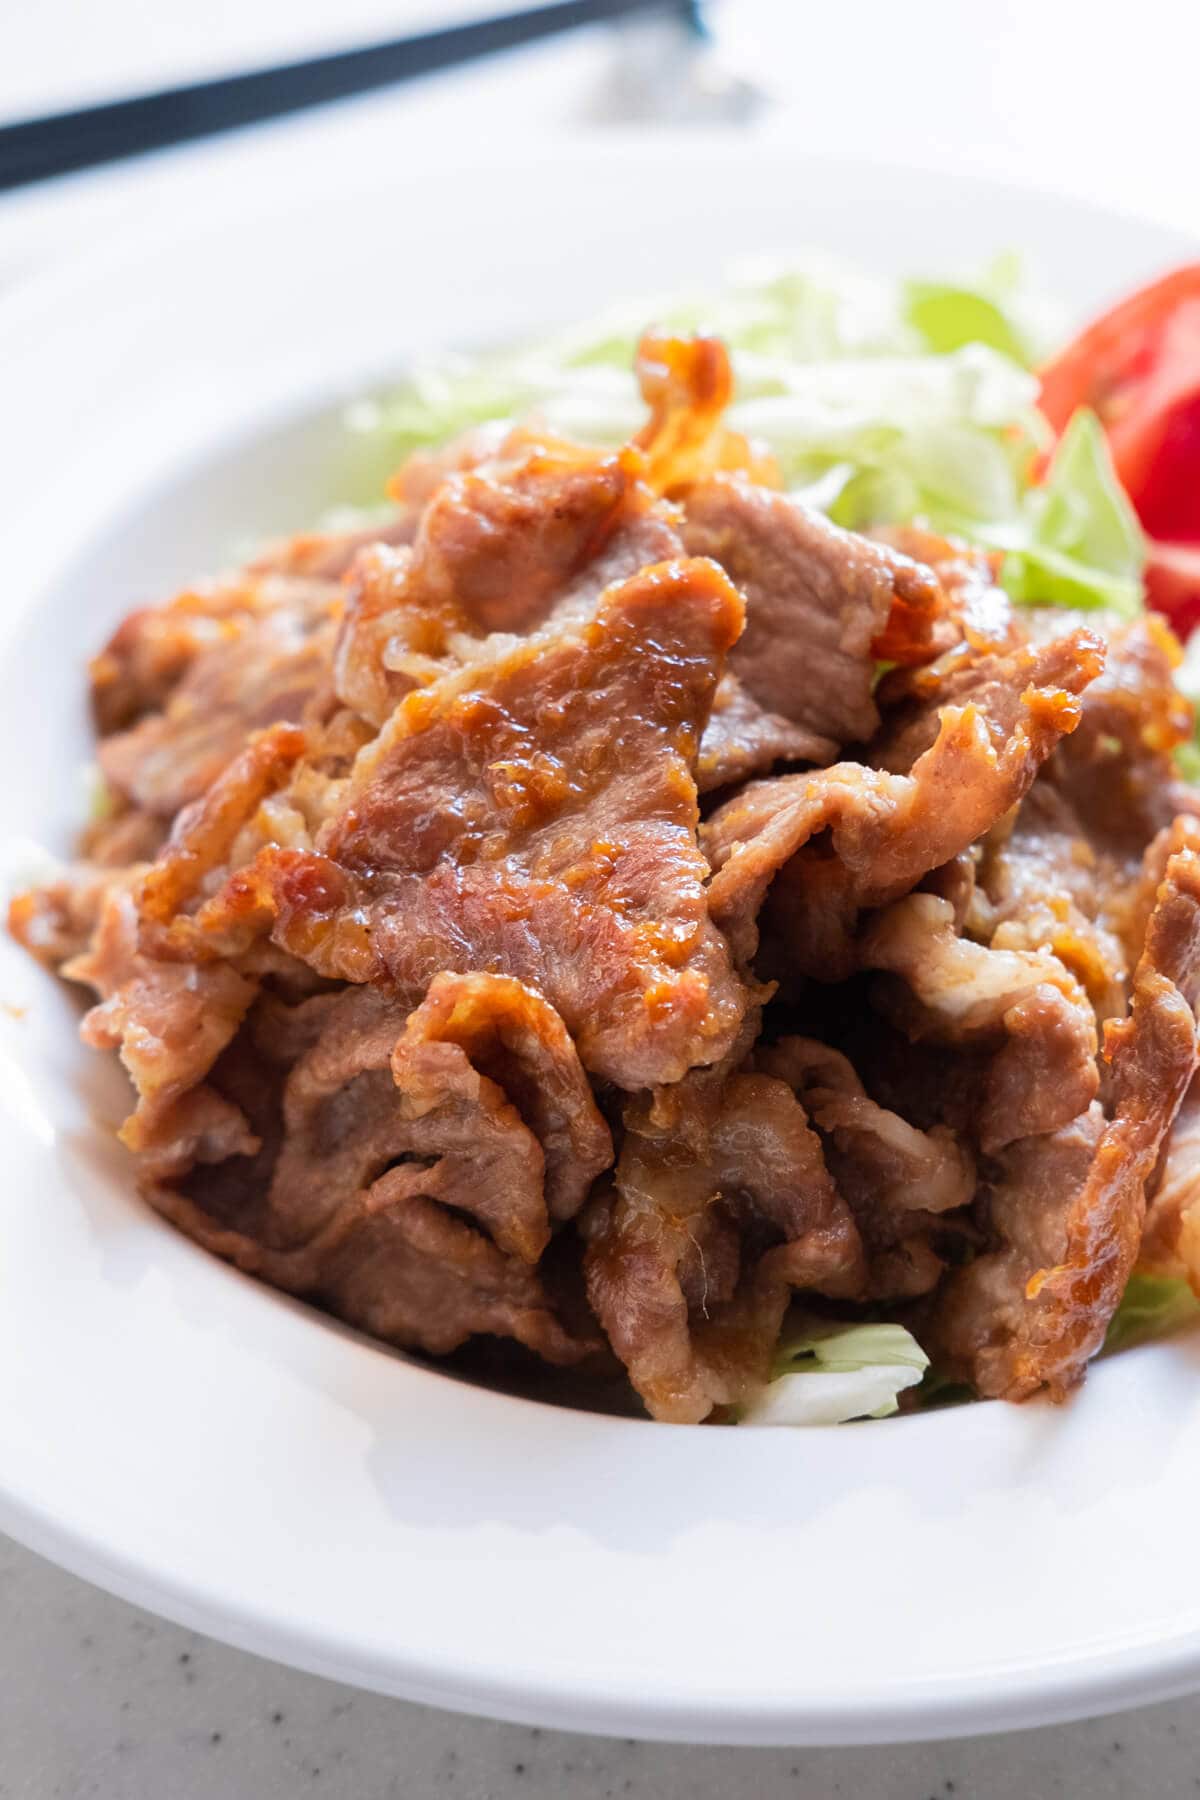 Tender, juicy pork slices coated with savory ginger sauce served in a plate.